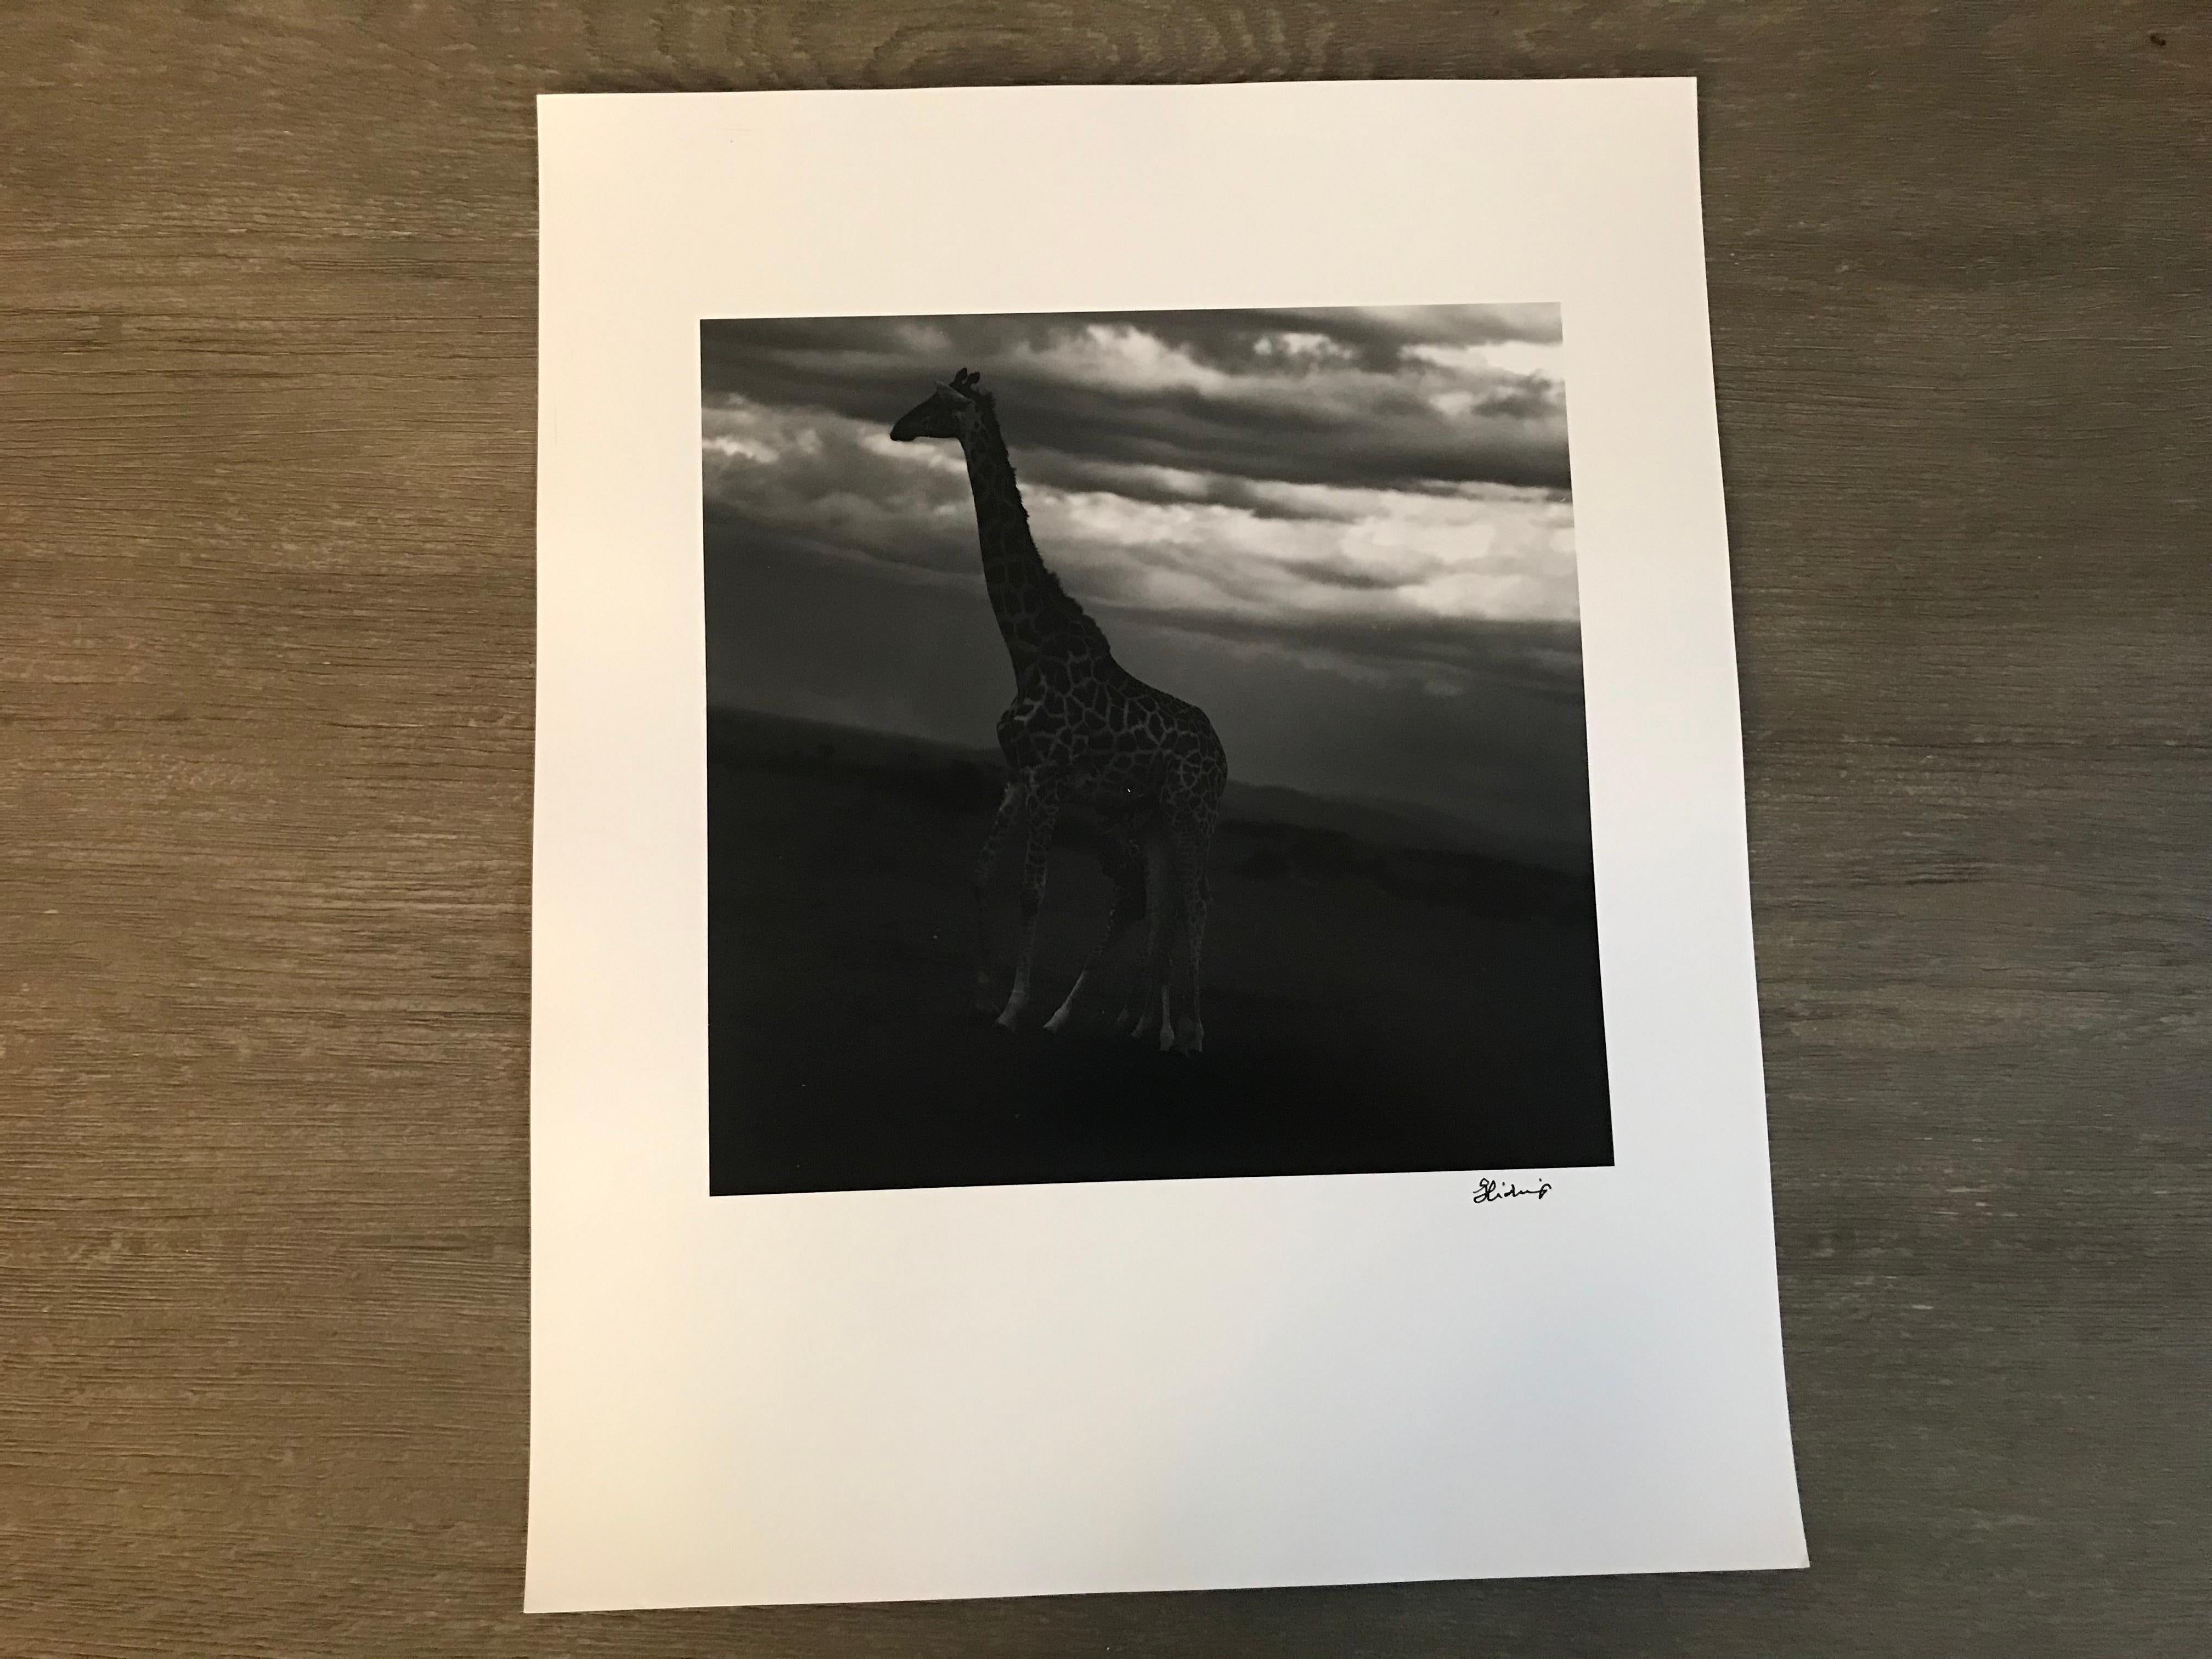 Photos of Hideoki™ are being sold for the first time in 2019. This piece is a one and only original artist silver gelatin print affixed with his signature in front of the photo.                 

